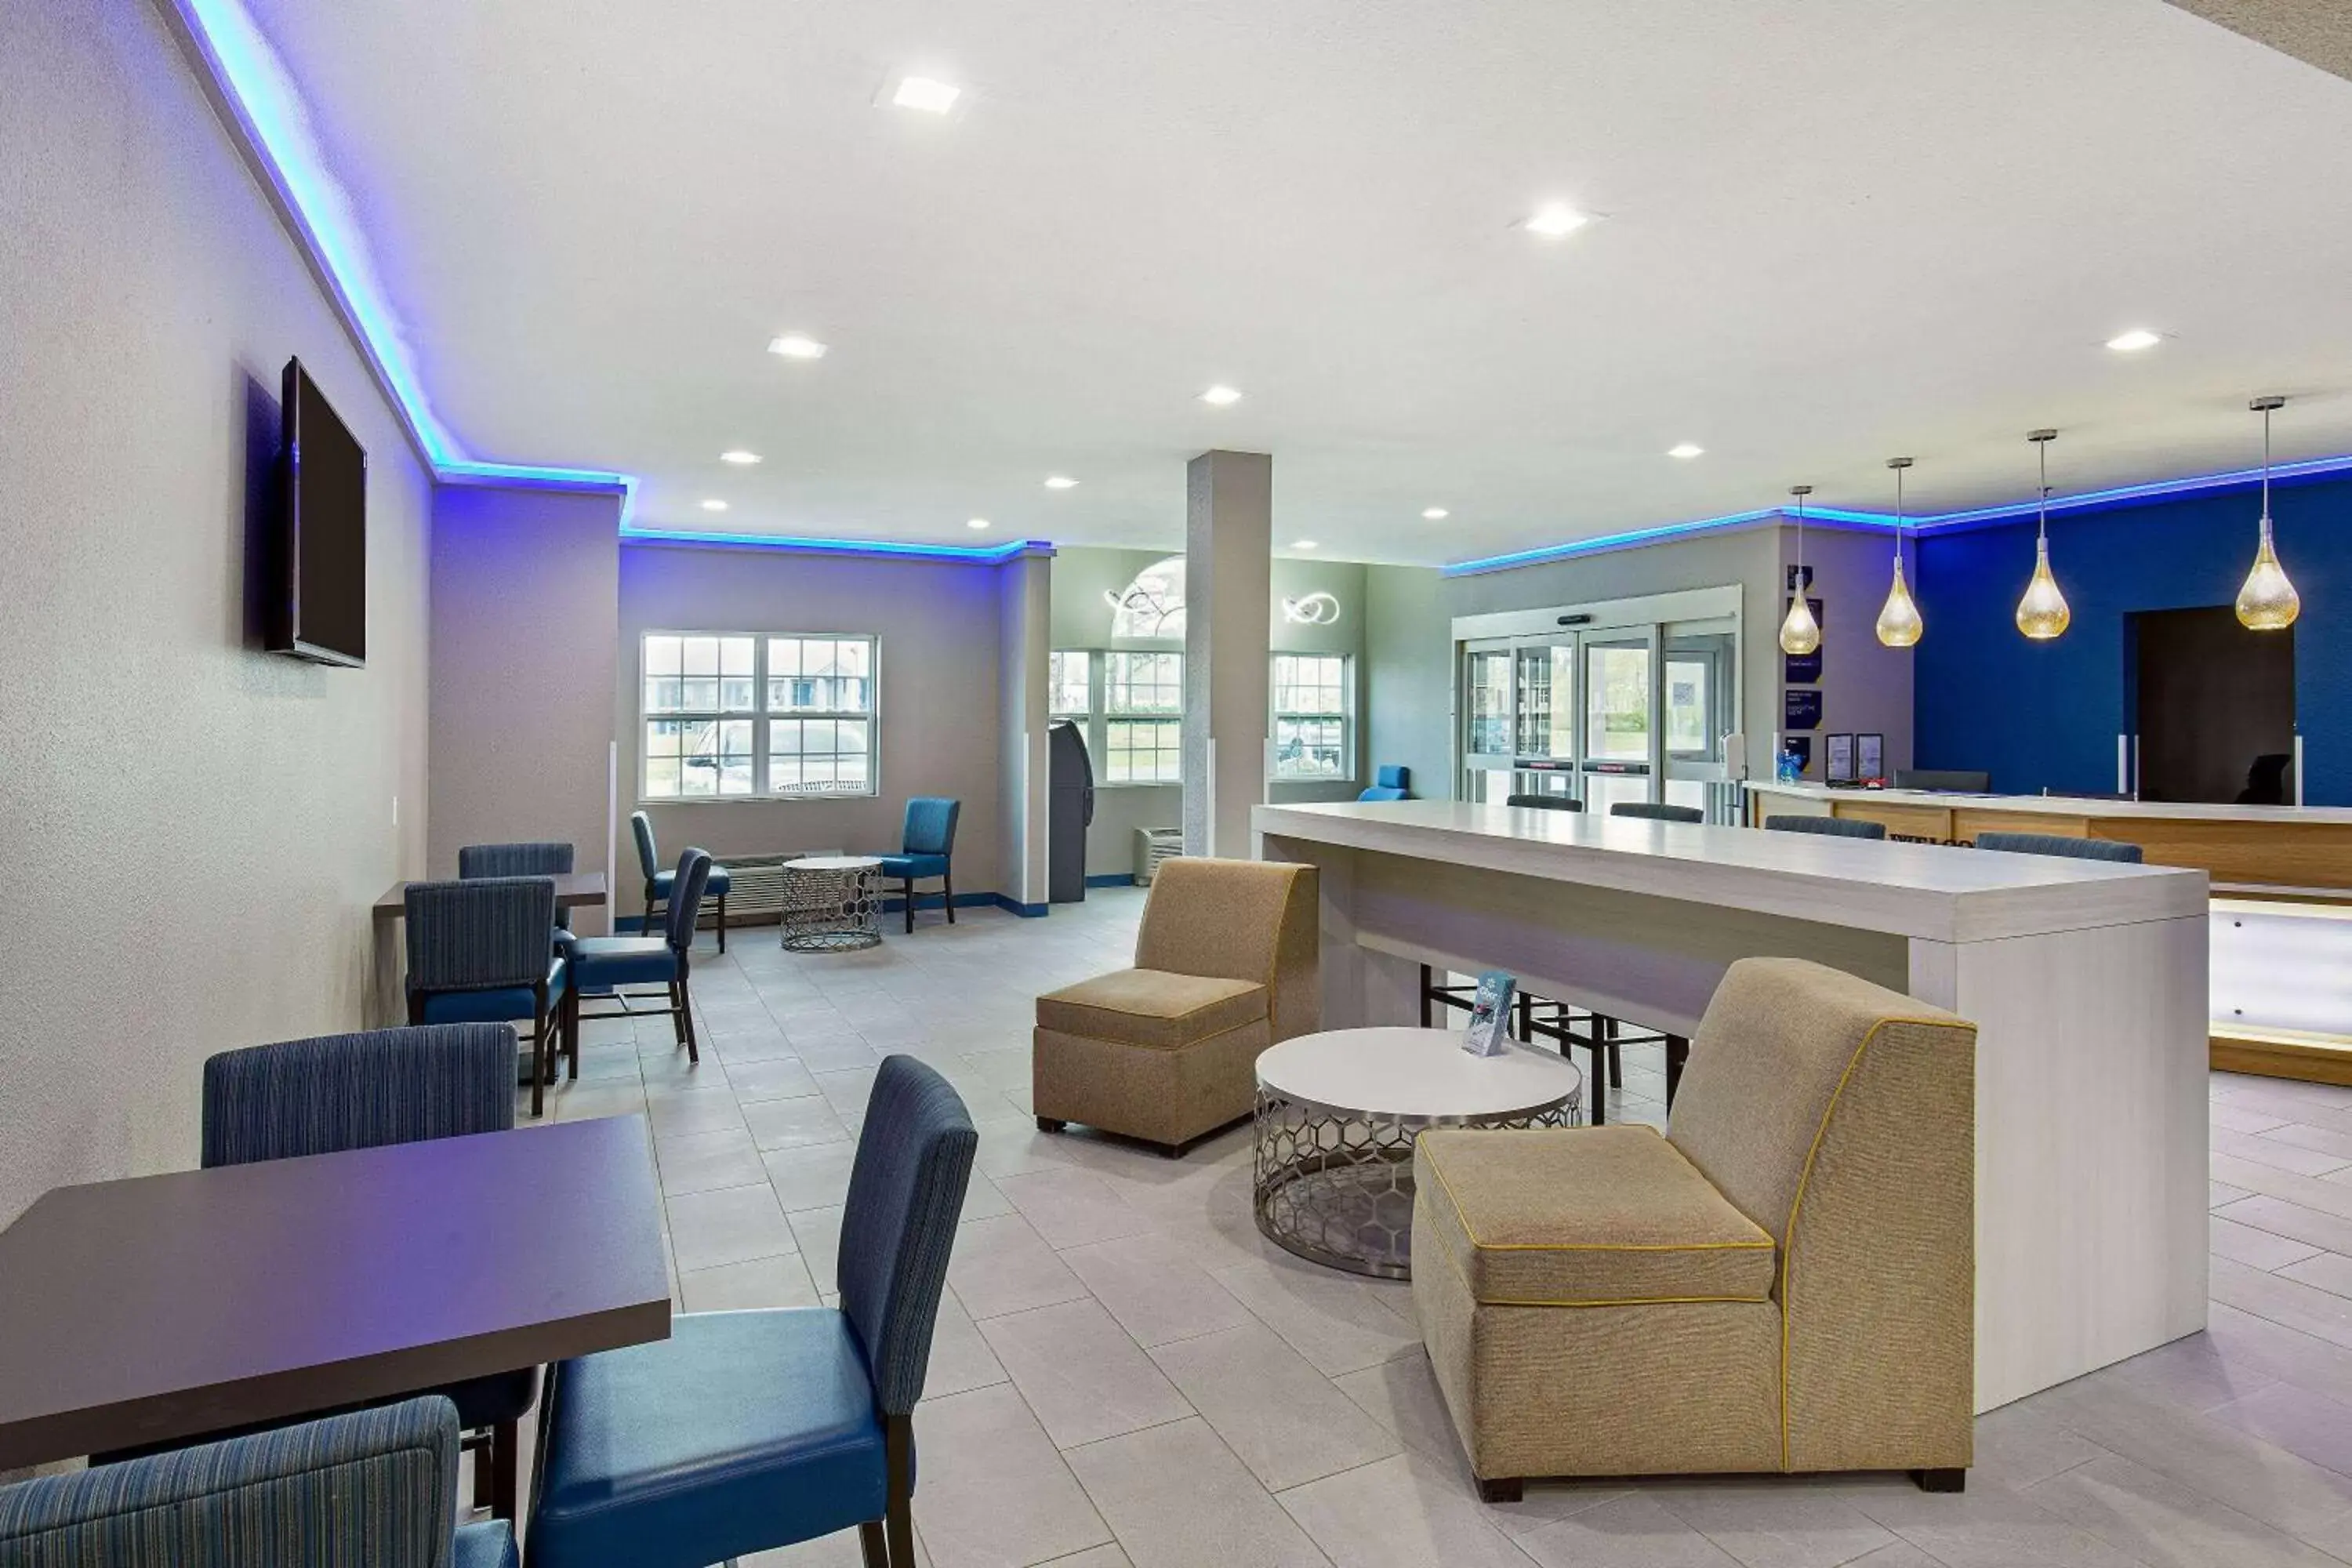 Lobby or reception in Microtel Inn & Suites by Wyndham Manchester - Newly Renovated